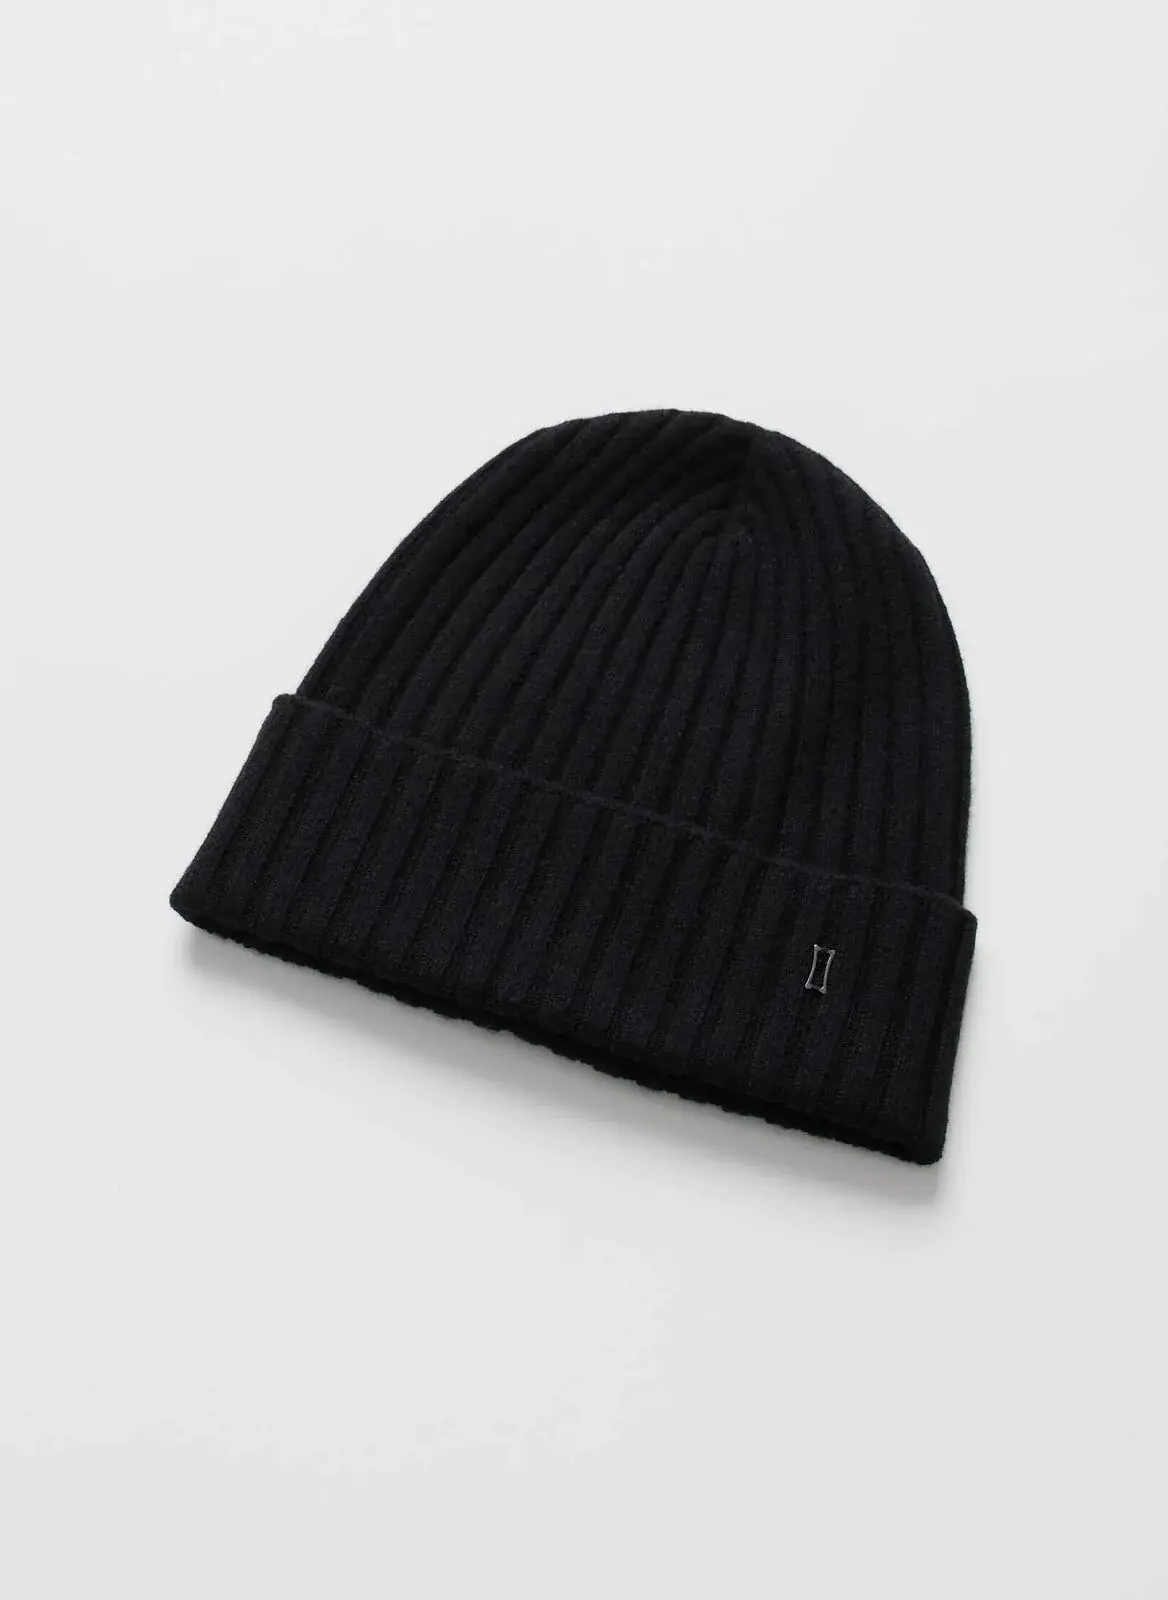 Kit And Ace Burbank Cashmere Toque. 1